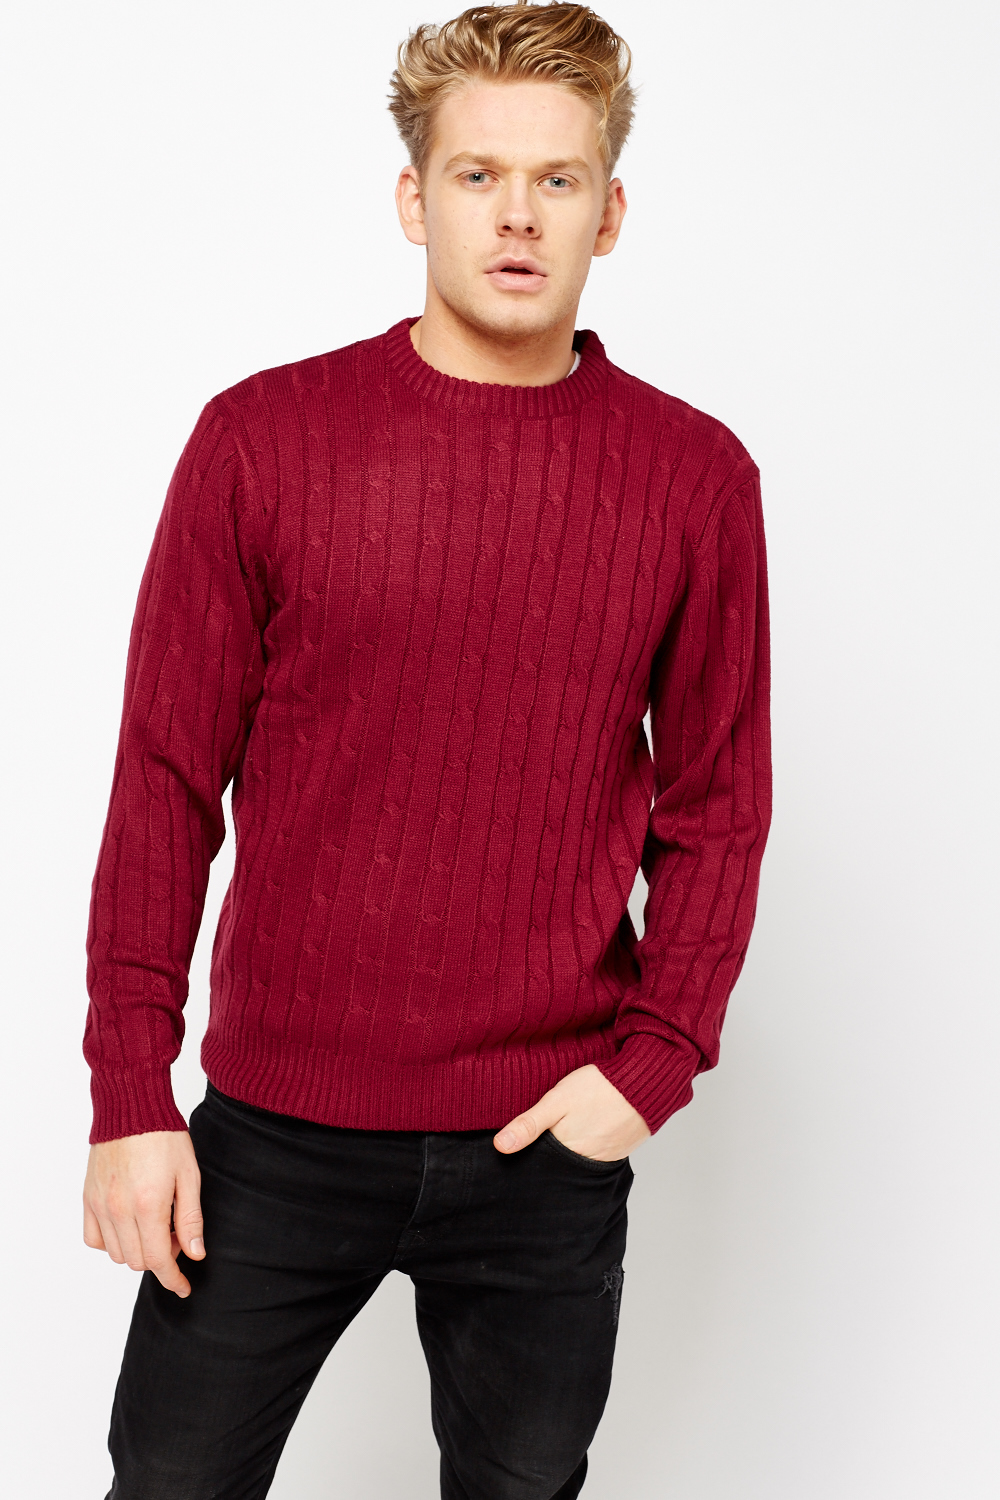 Cable Knit Mens Jumper - Just $6